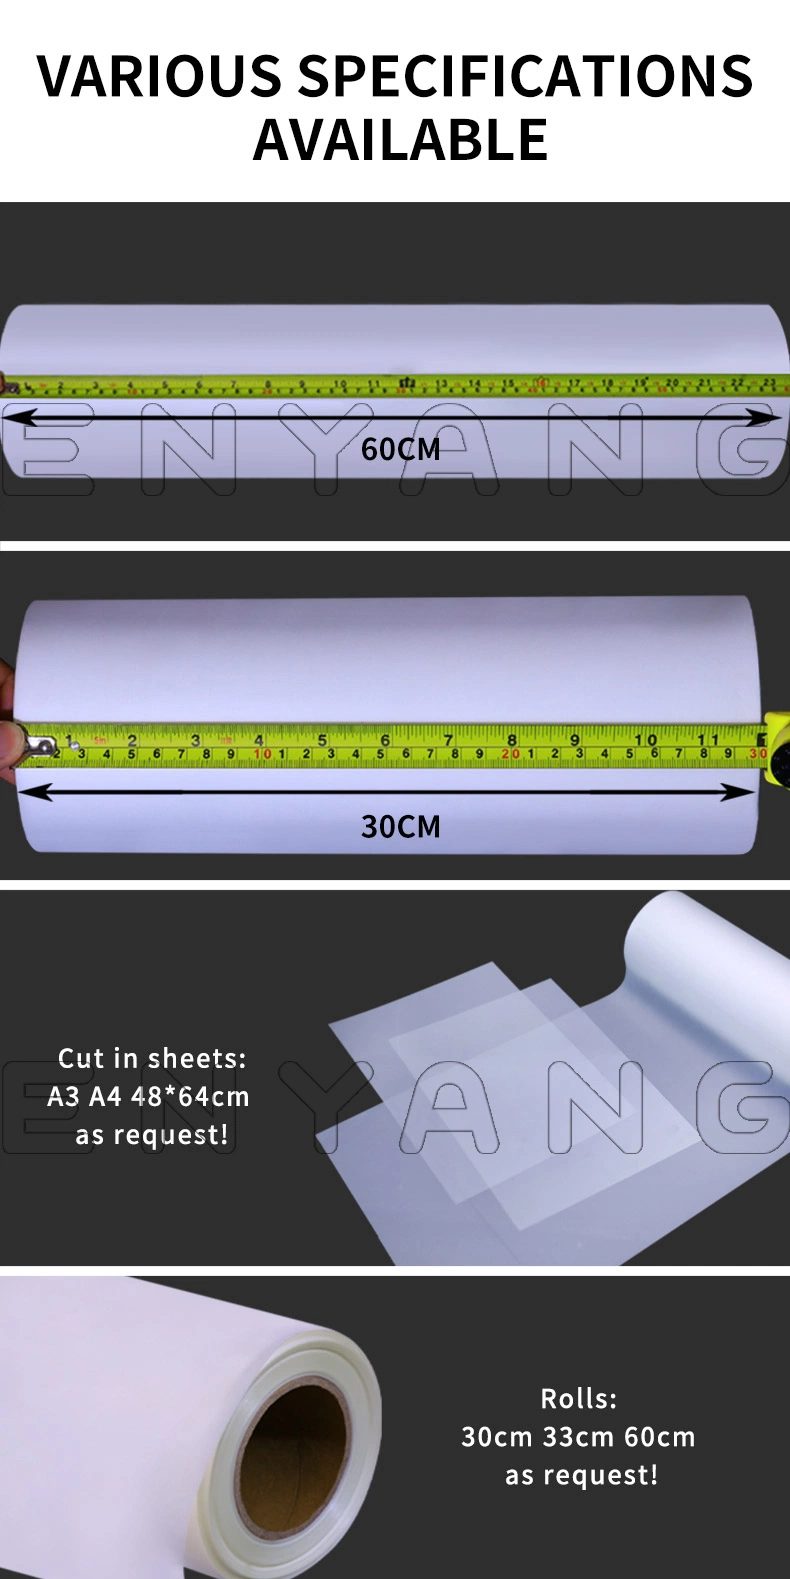 with Strong Ink Absorption Pet Transfer Film, Cold Peel Film, 23.6&quot; X 328FT Per Roll